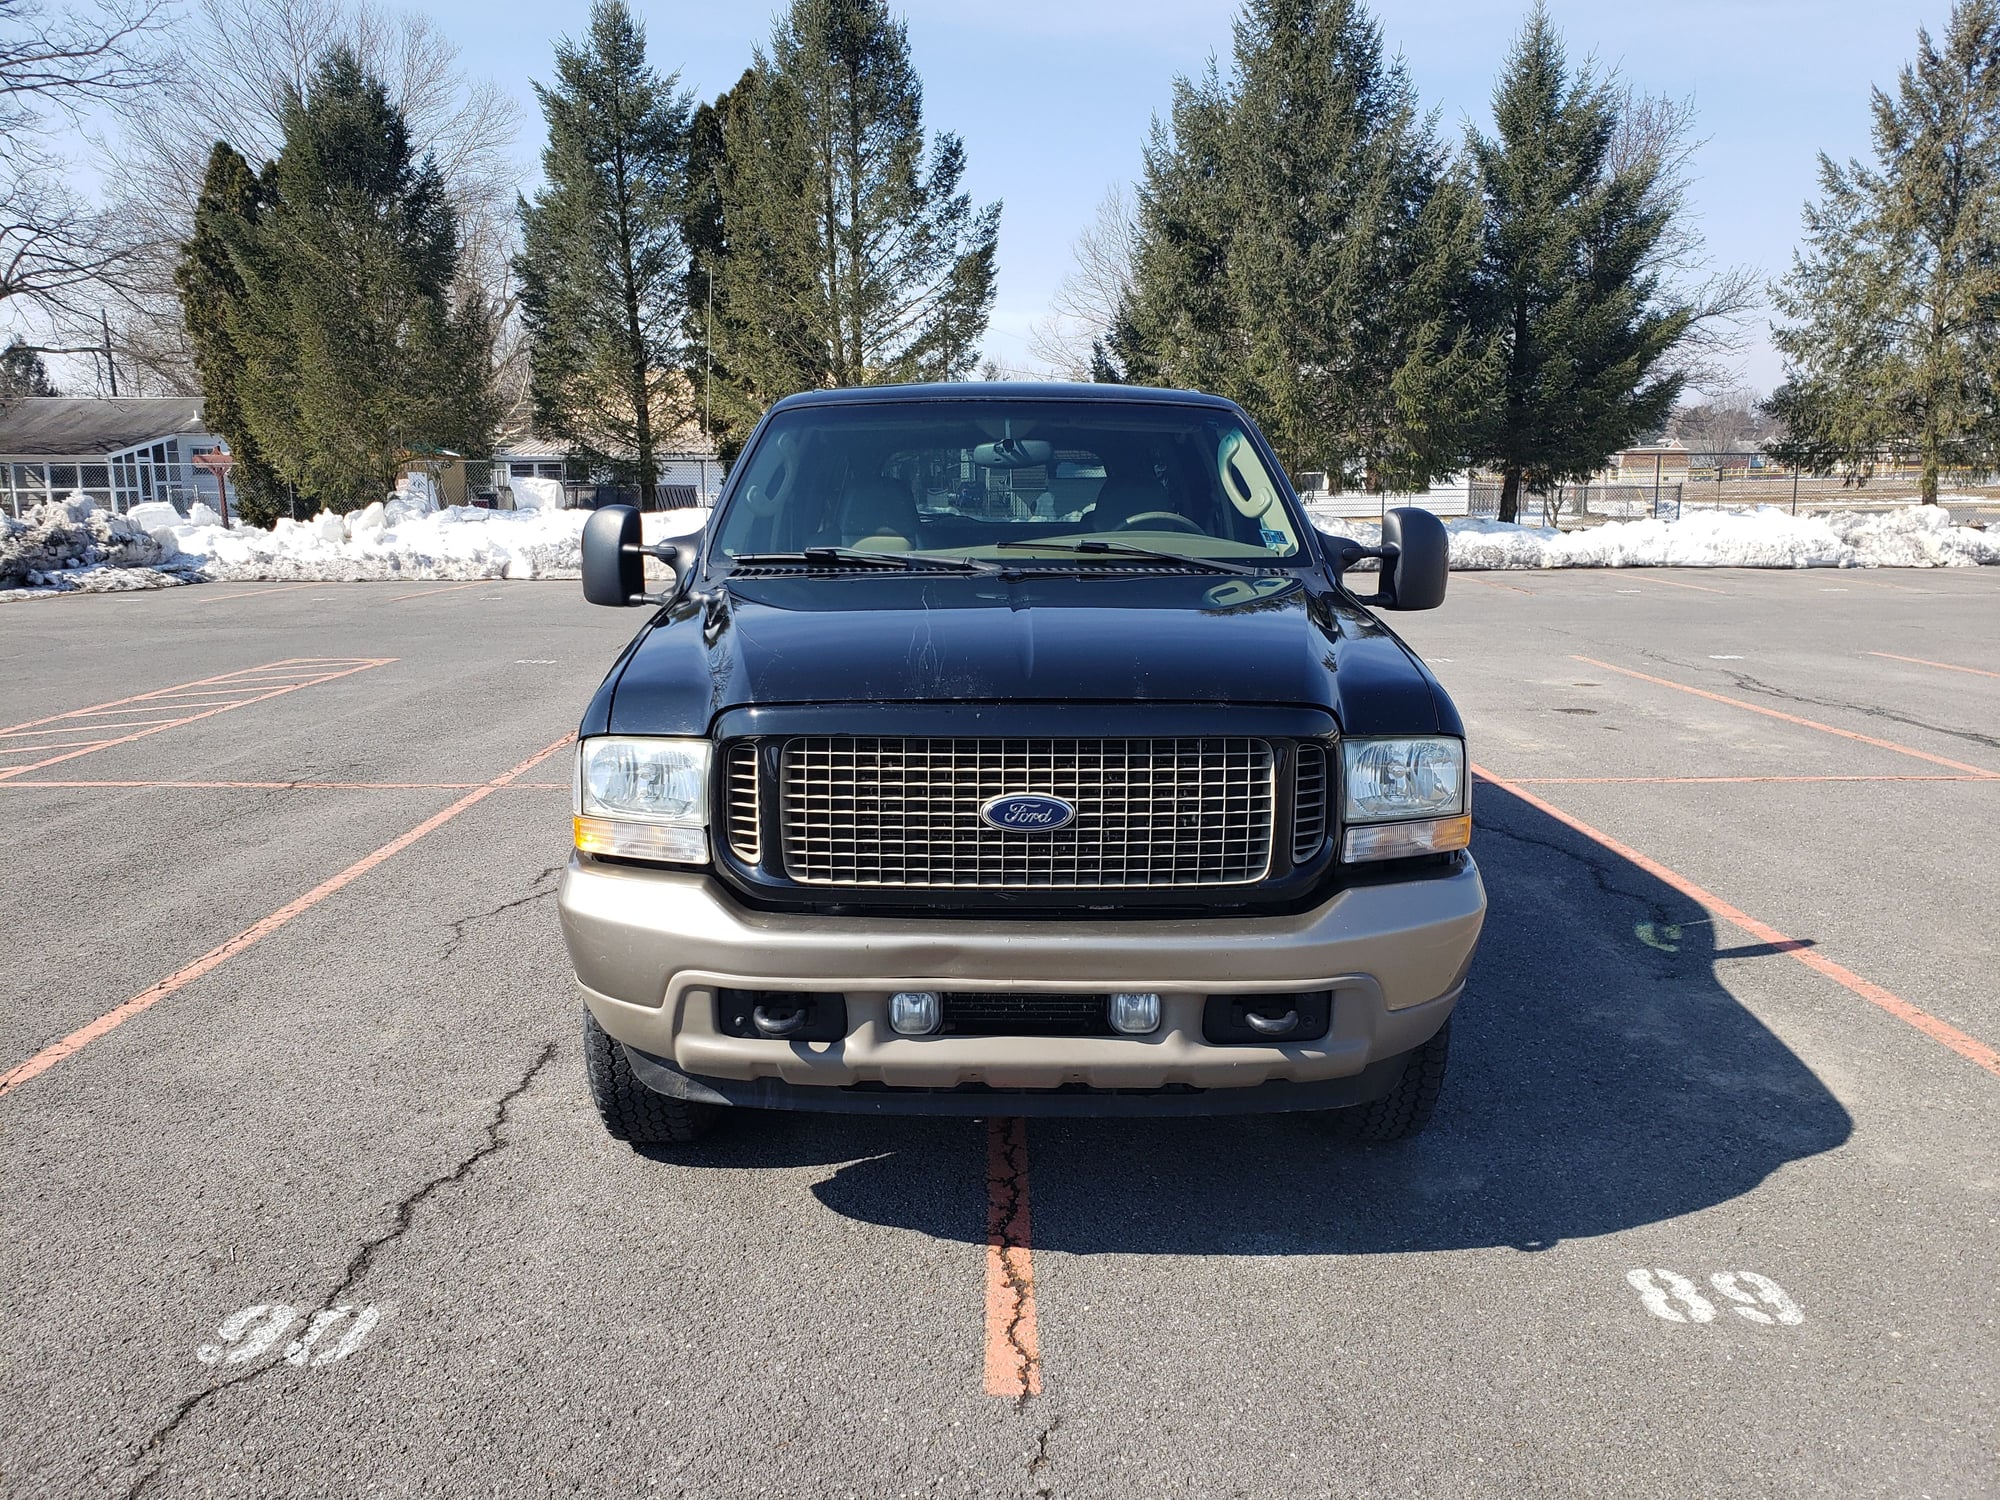 2004 Ford Excursion - Central PA Excursion for sale - Used - VIN 1fmsu45p54ed59200 - 280,000 Miles - 8 cyl - 4WD - Automatic - SUV - Black - Lewisburg, PA 17837, United States